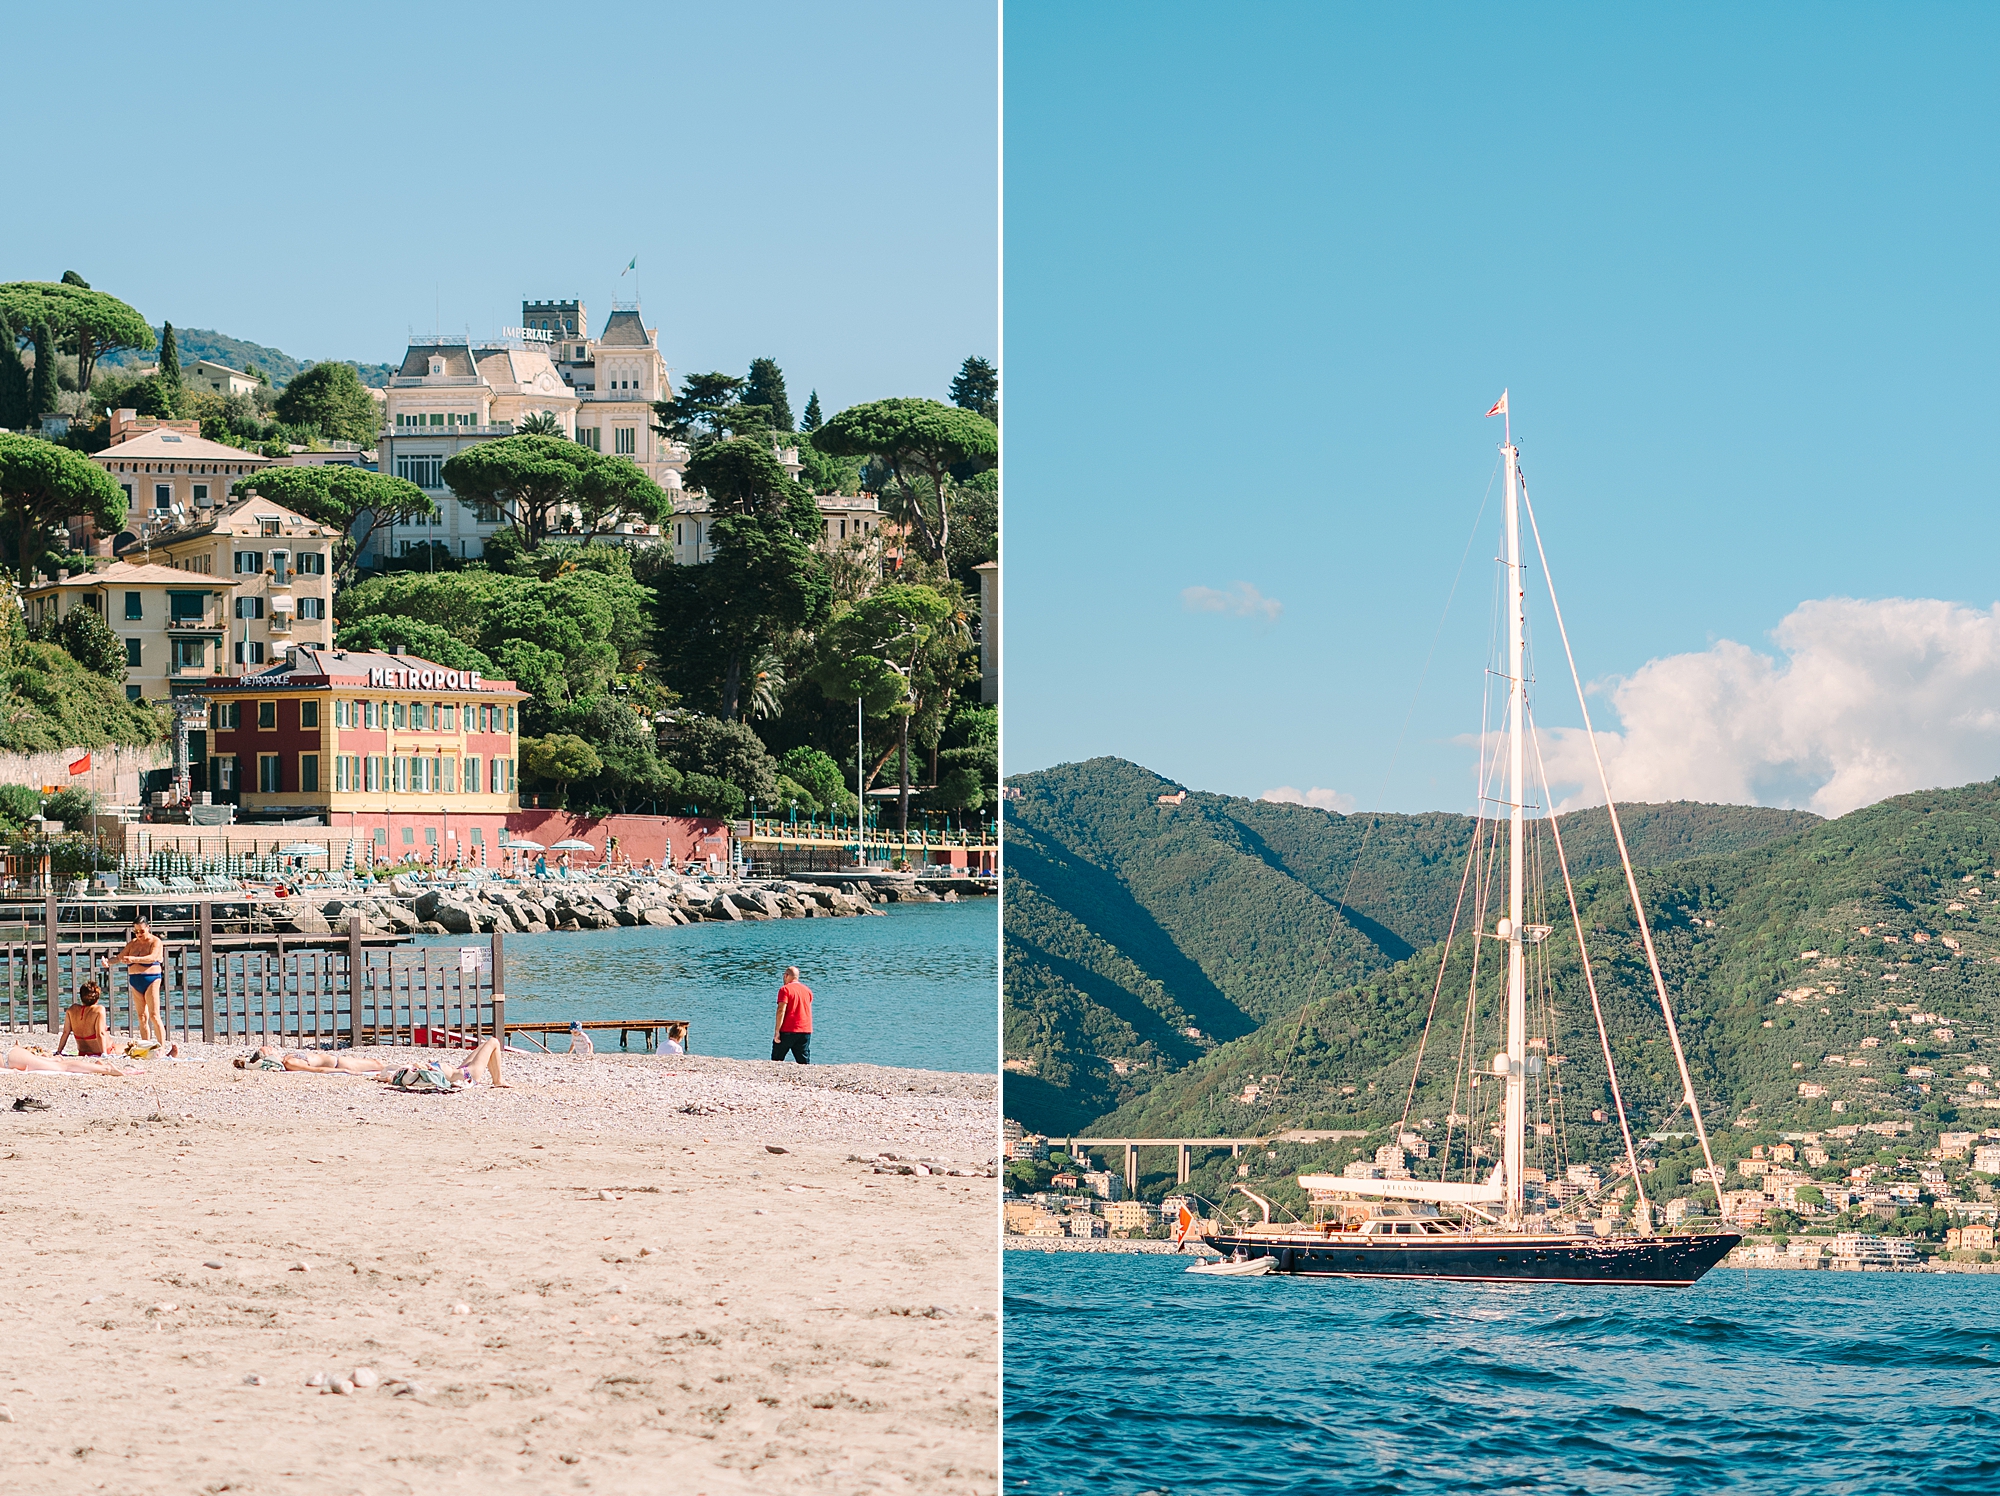 photographer Amy Allmand shares her trip to Italy in 2023 including her favorite stops including the coastline